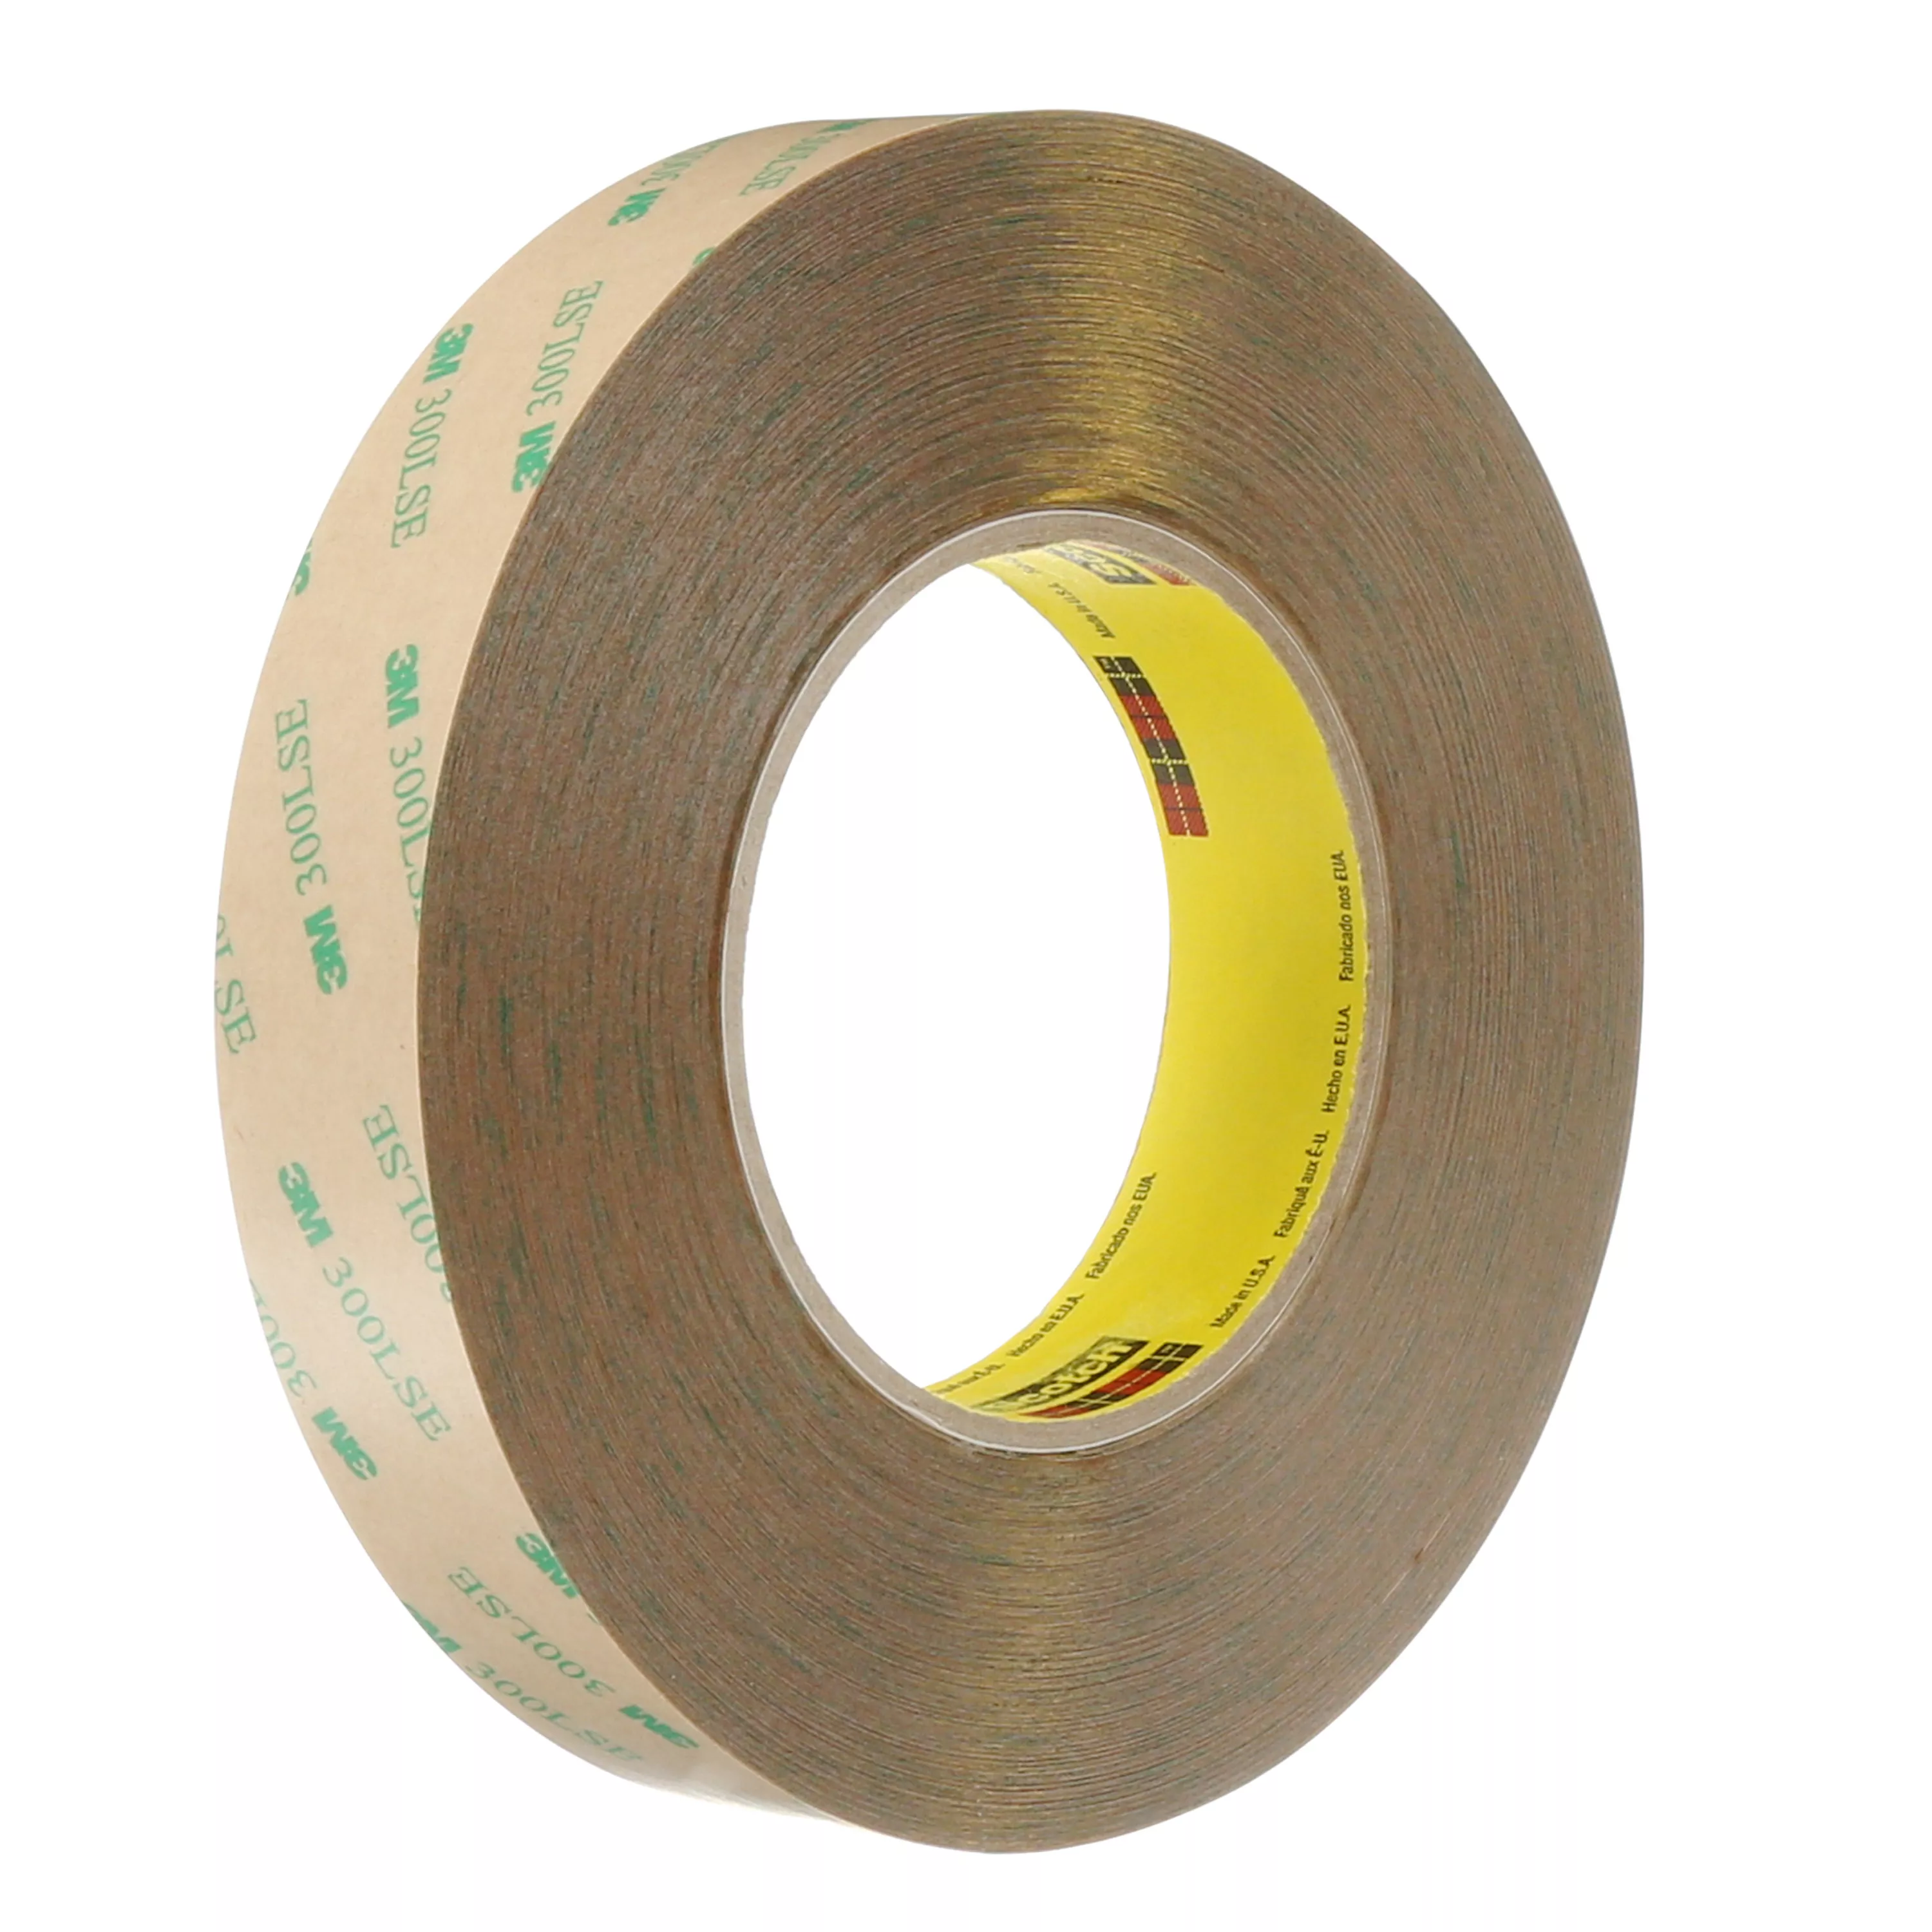 3M™ Adhesive Transfer Tape 9471LE, Clear, 3/4 in x 60 yd, 2 mil, 12
Roll/Case